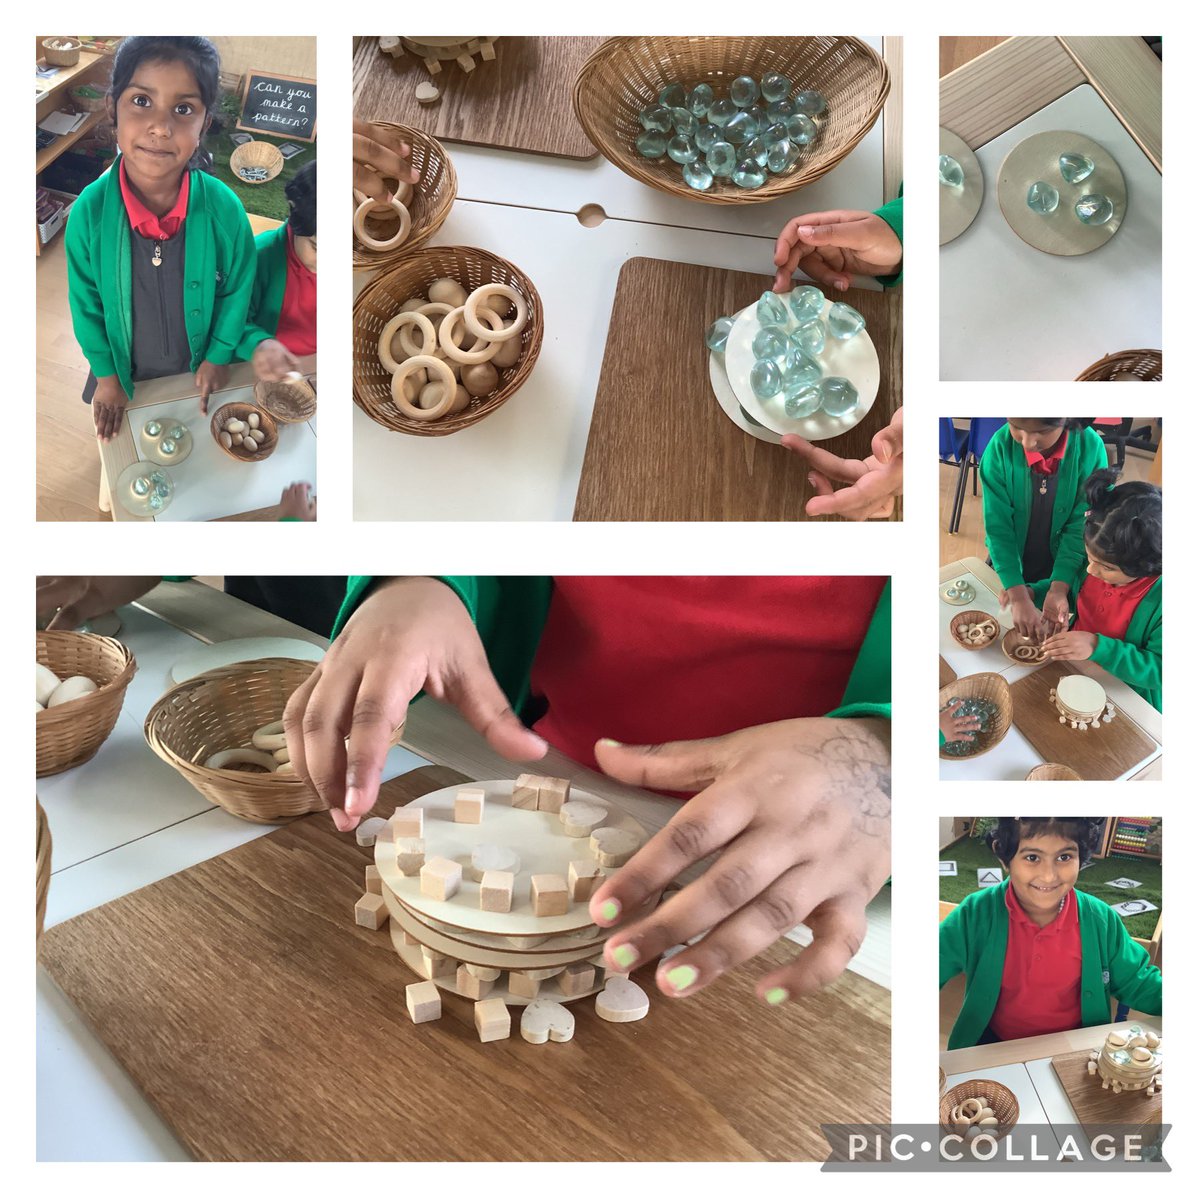 Loose parts play was very busy this morning. The #enterprisingcreative children made cakes 🧁🎂🍰 blasus iawn! #EY #openendedplay #imaginative #curiosity @CSC_FoundLearn